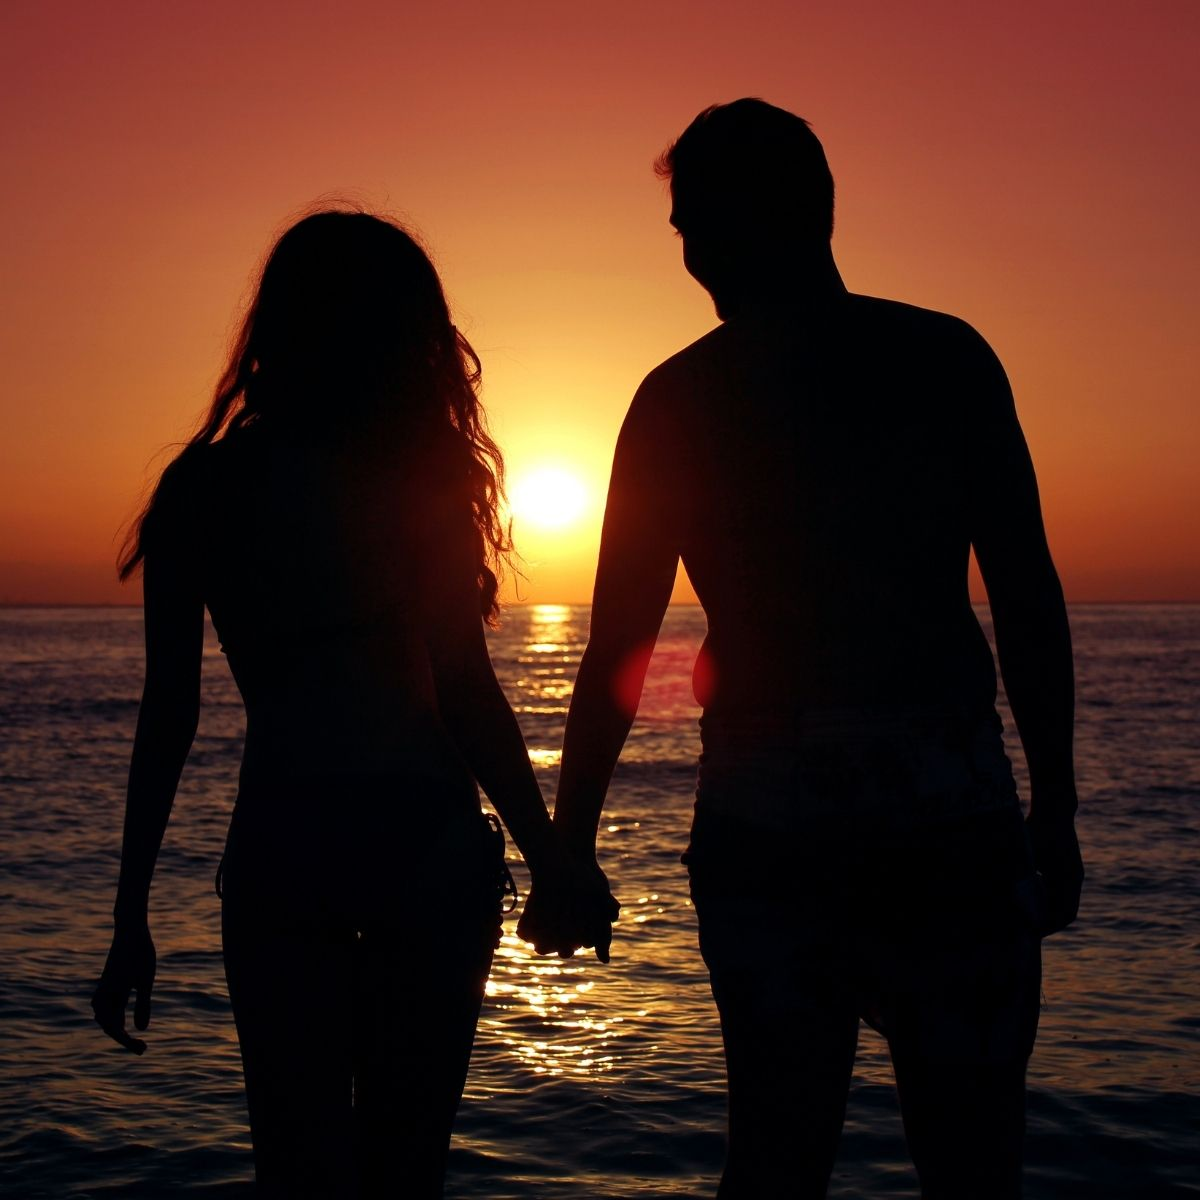 Love, holding hands at sunset: His ideal girl based on zodiac signs